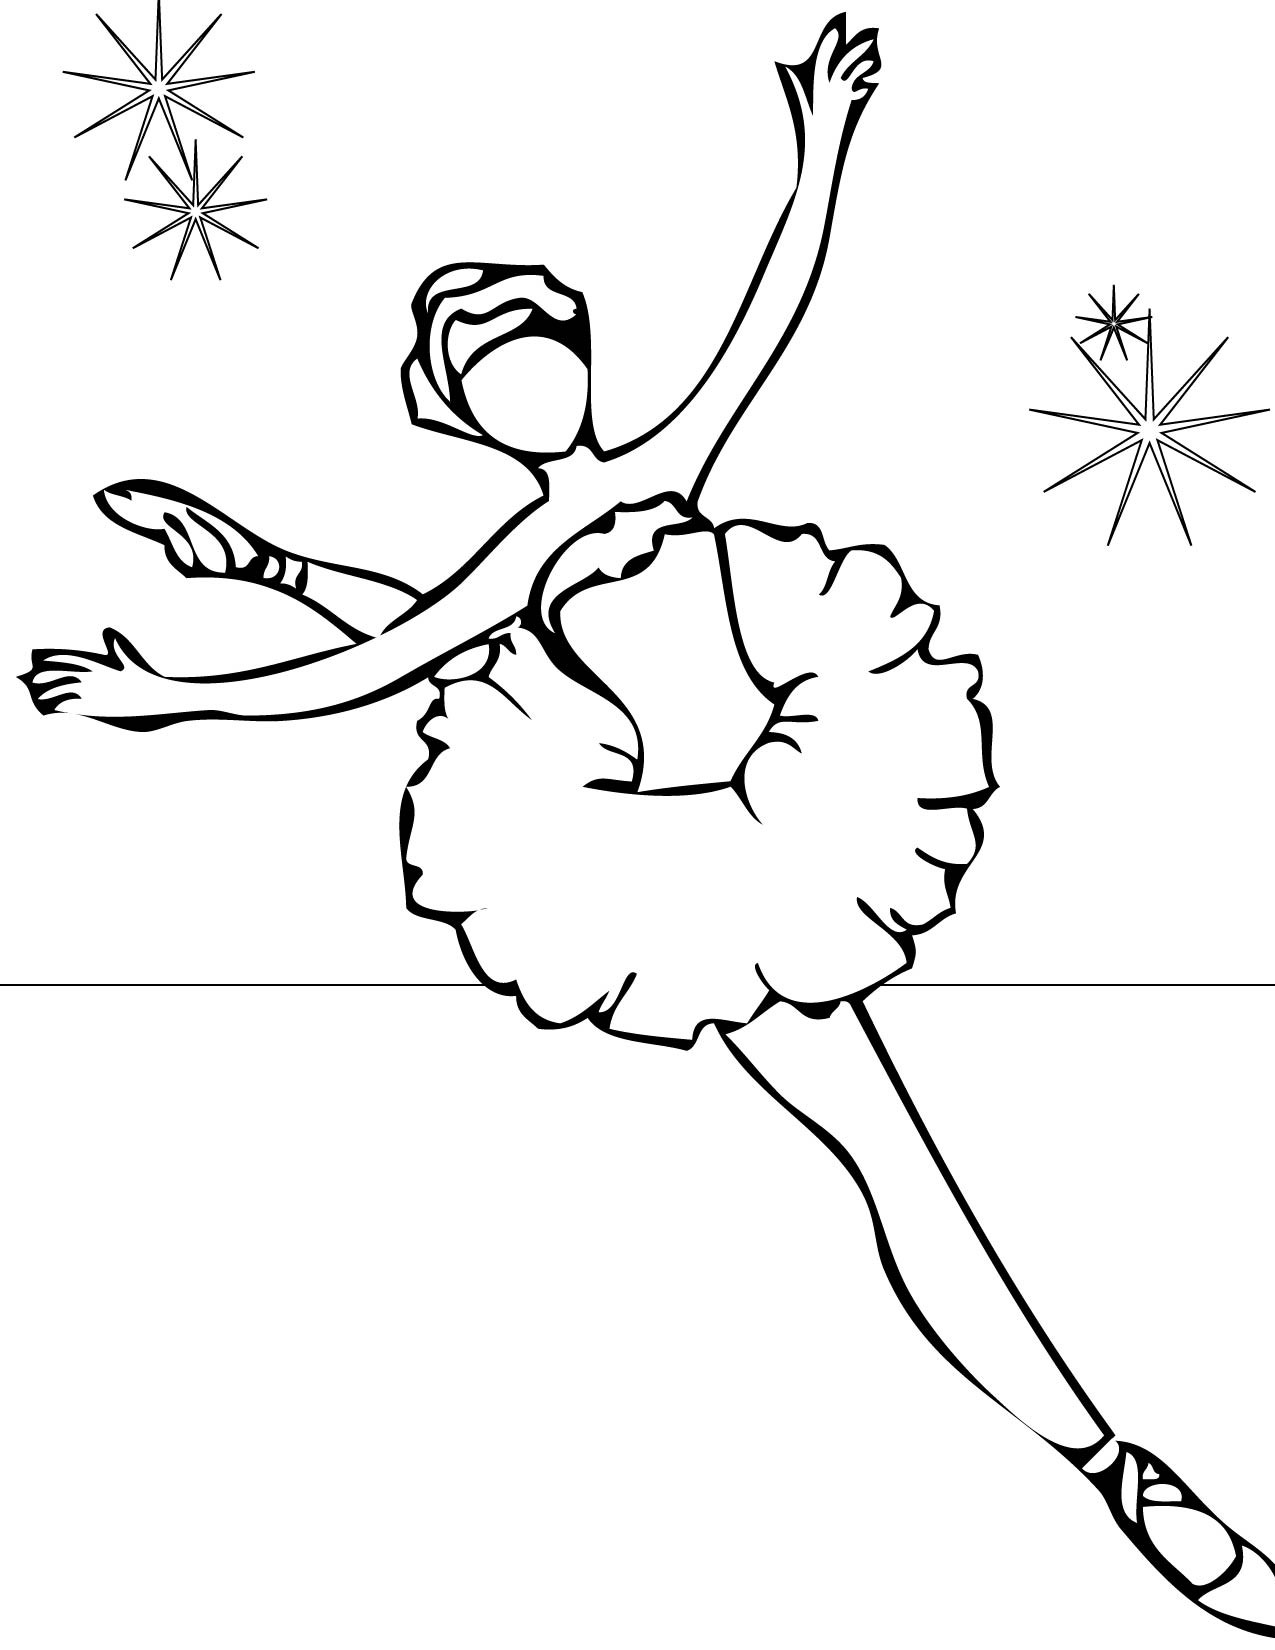 Balerina Coloring Pages
 Ballerina Coloring Pages for childrens printable for free